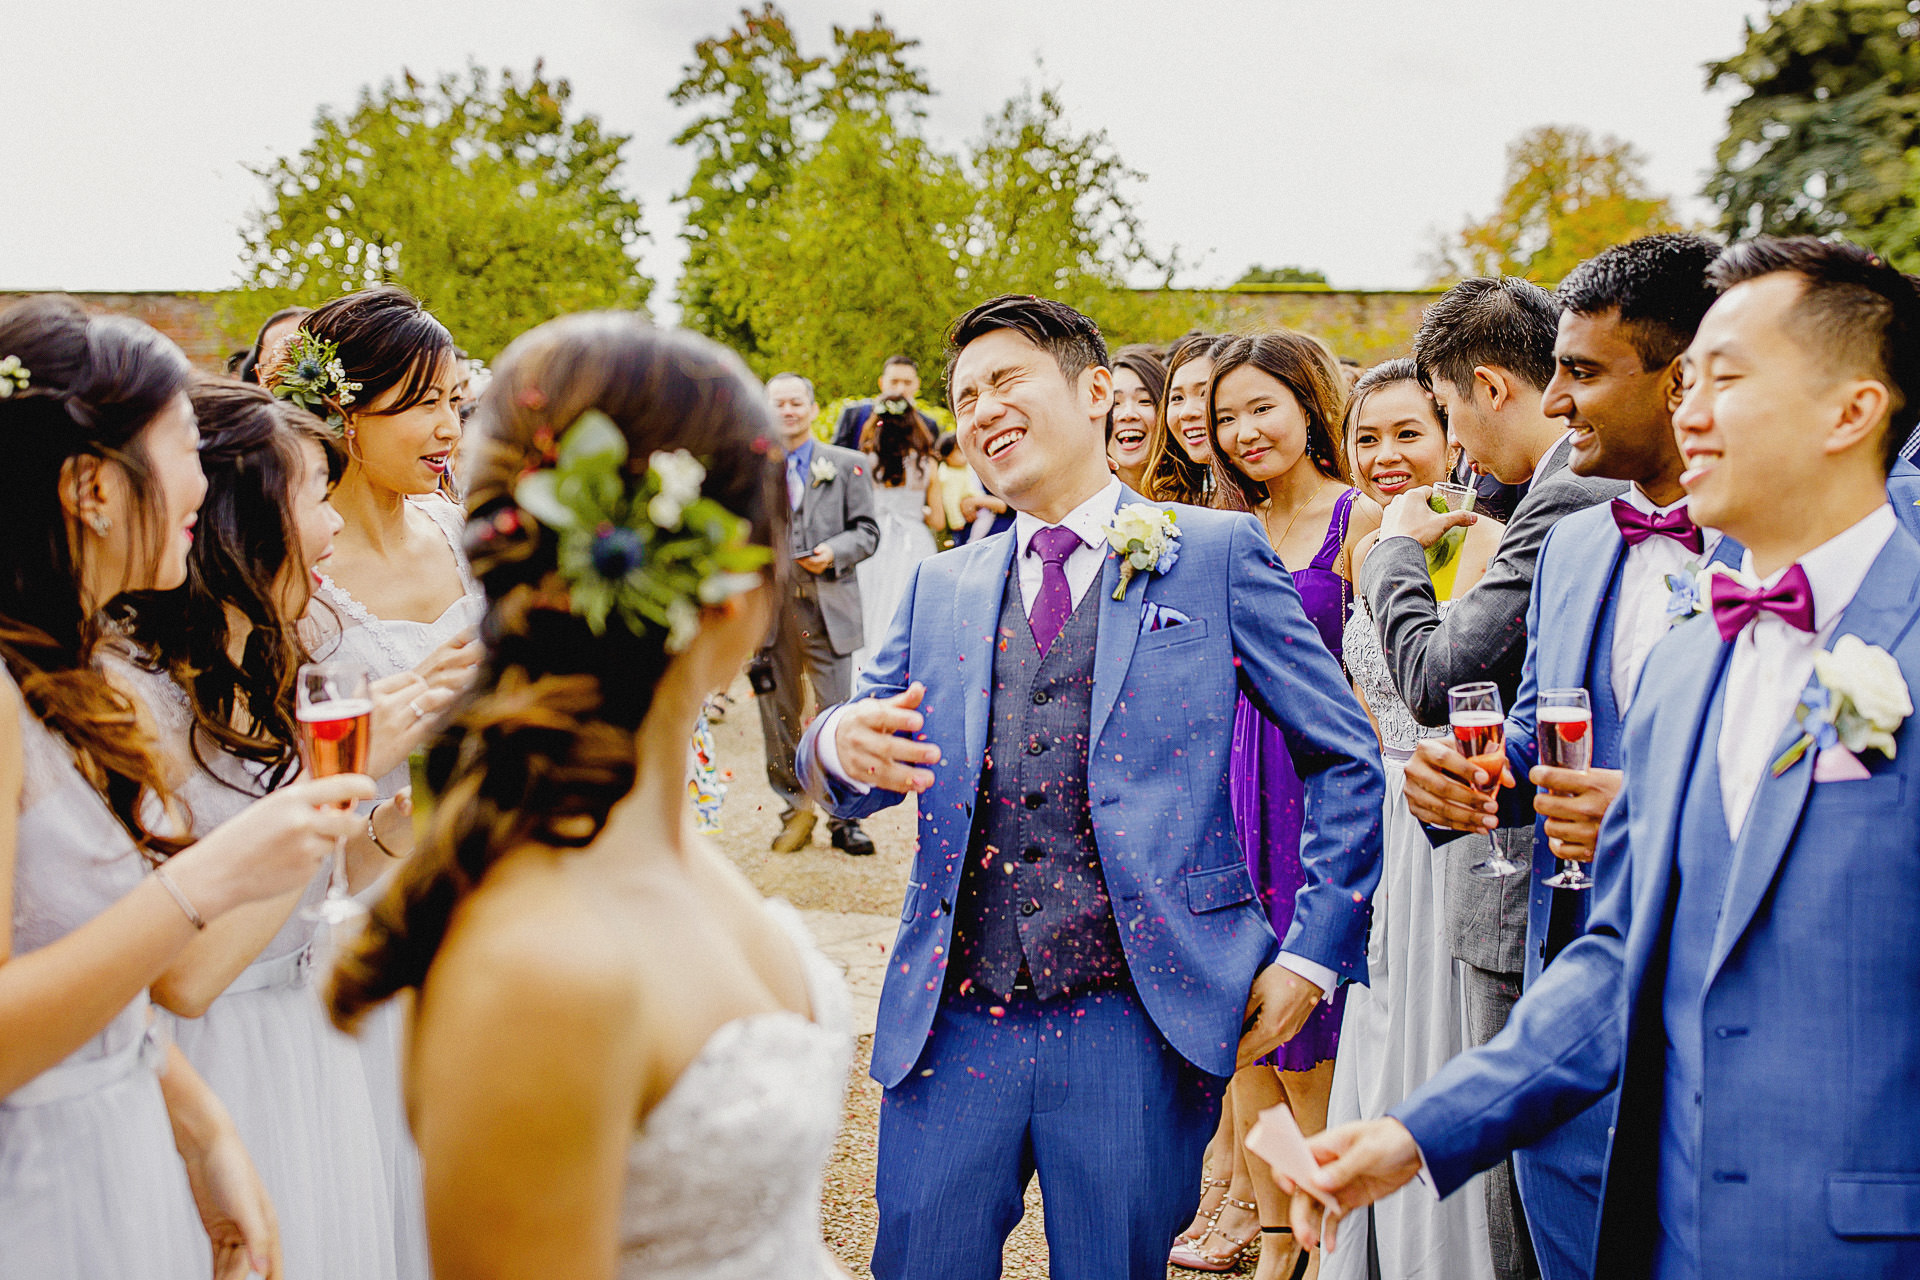 photography of wedding at combermere abbey